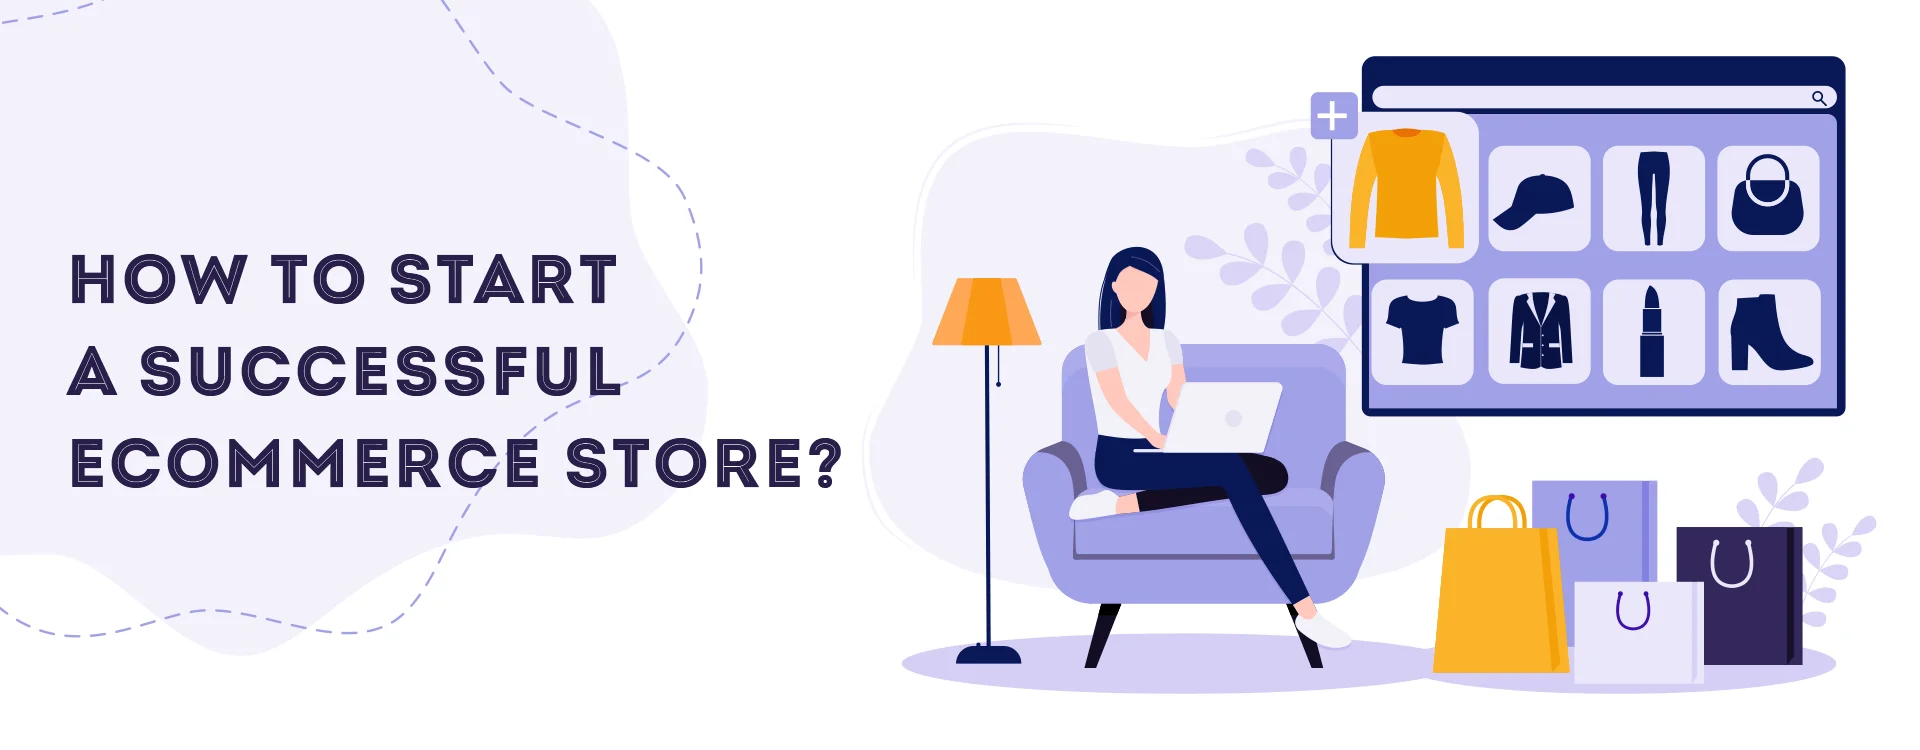 How to Start a Successful e-Commerce Store?